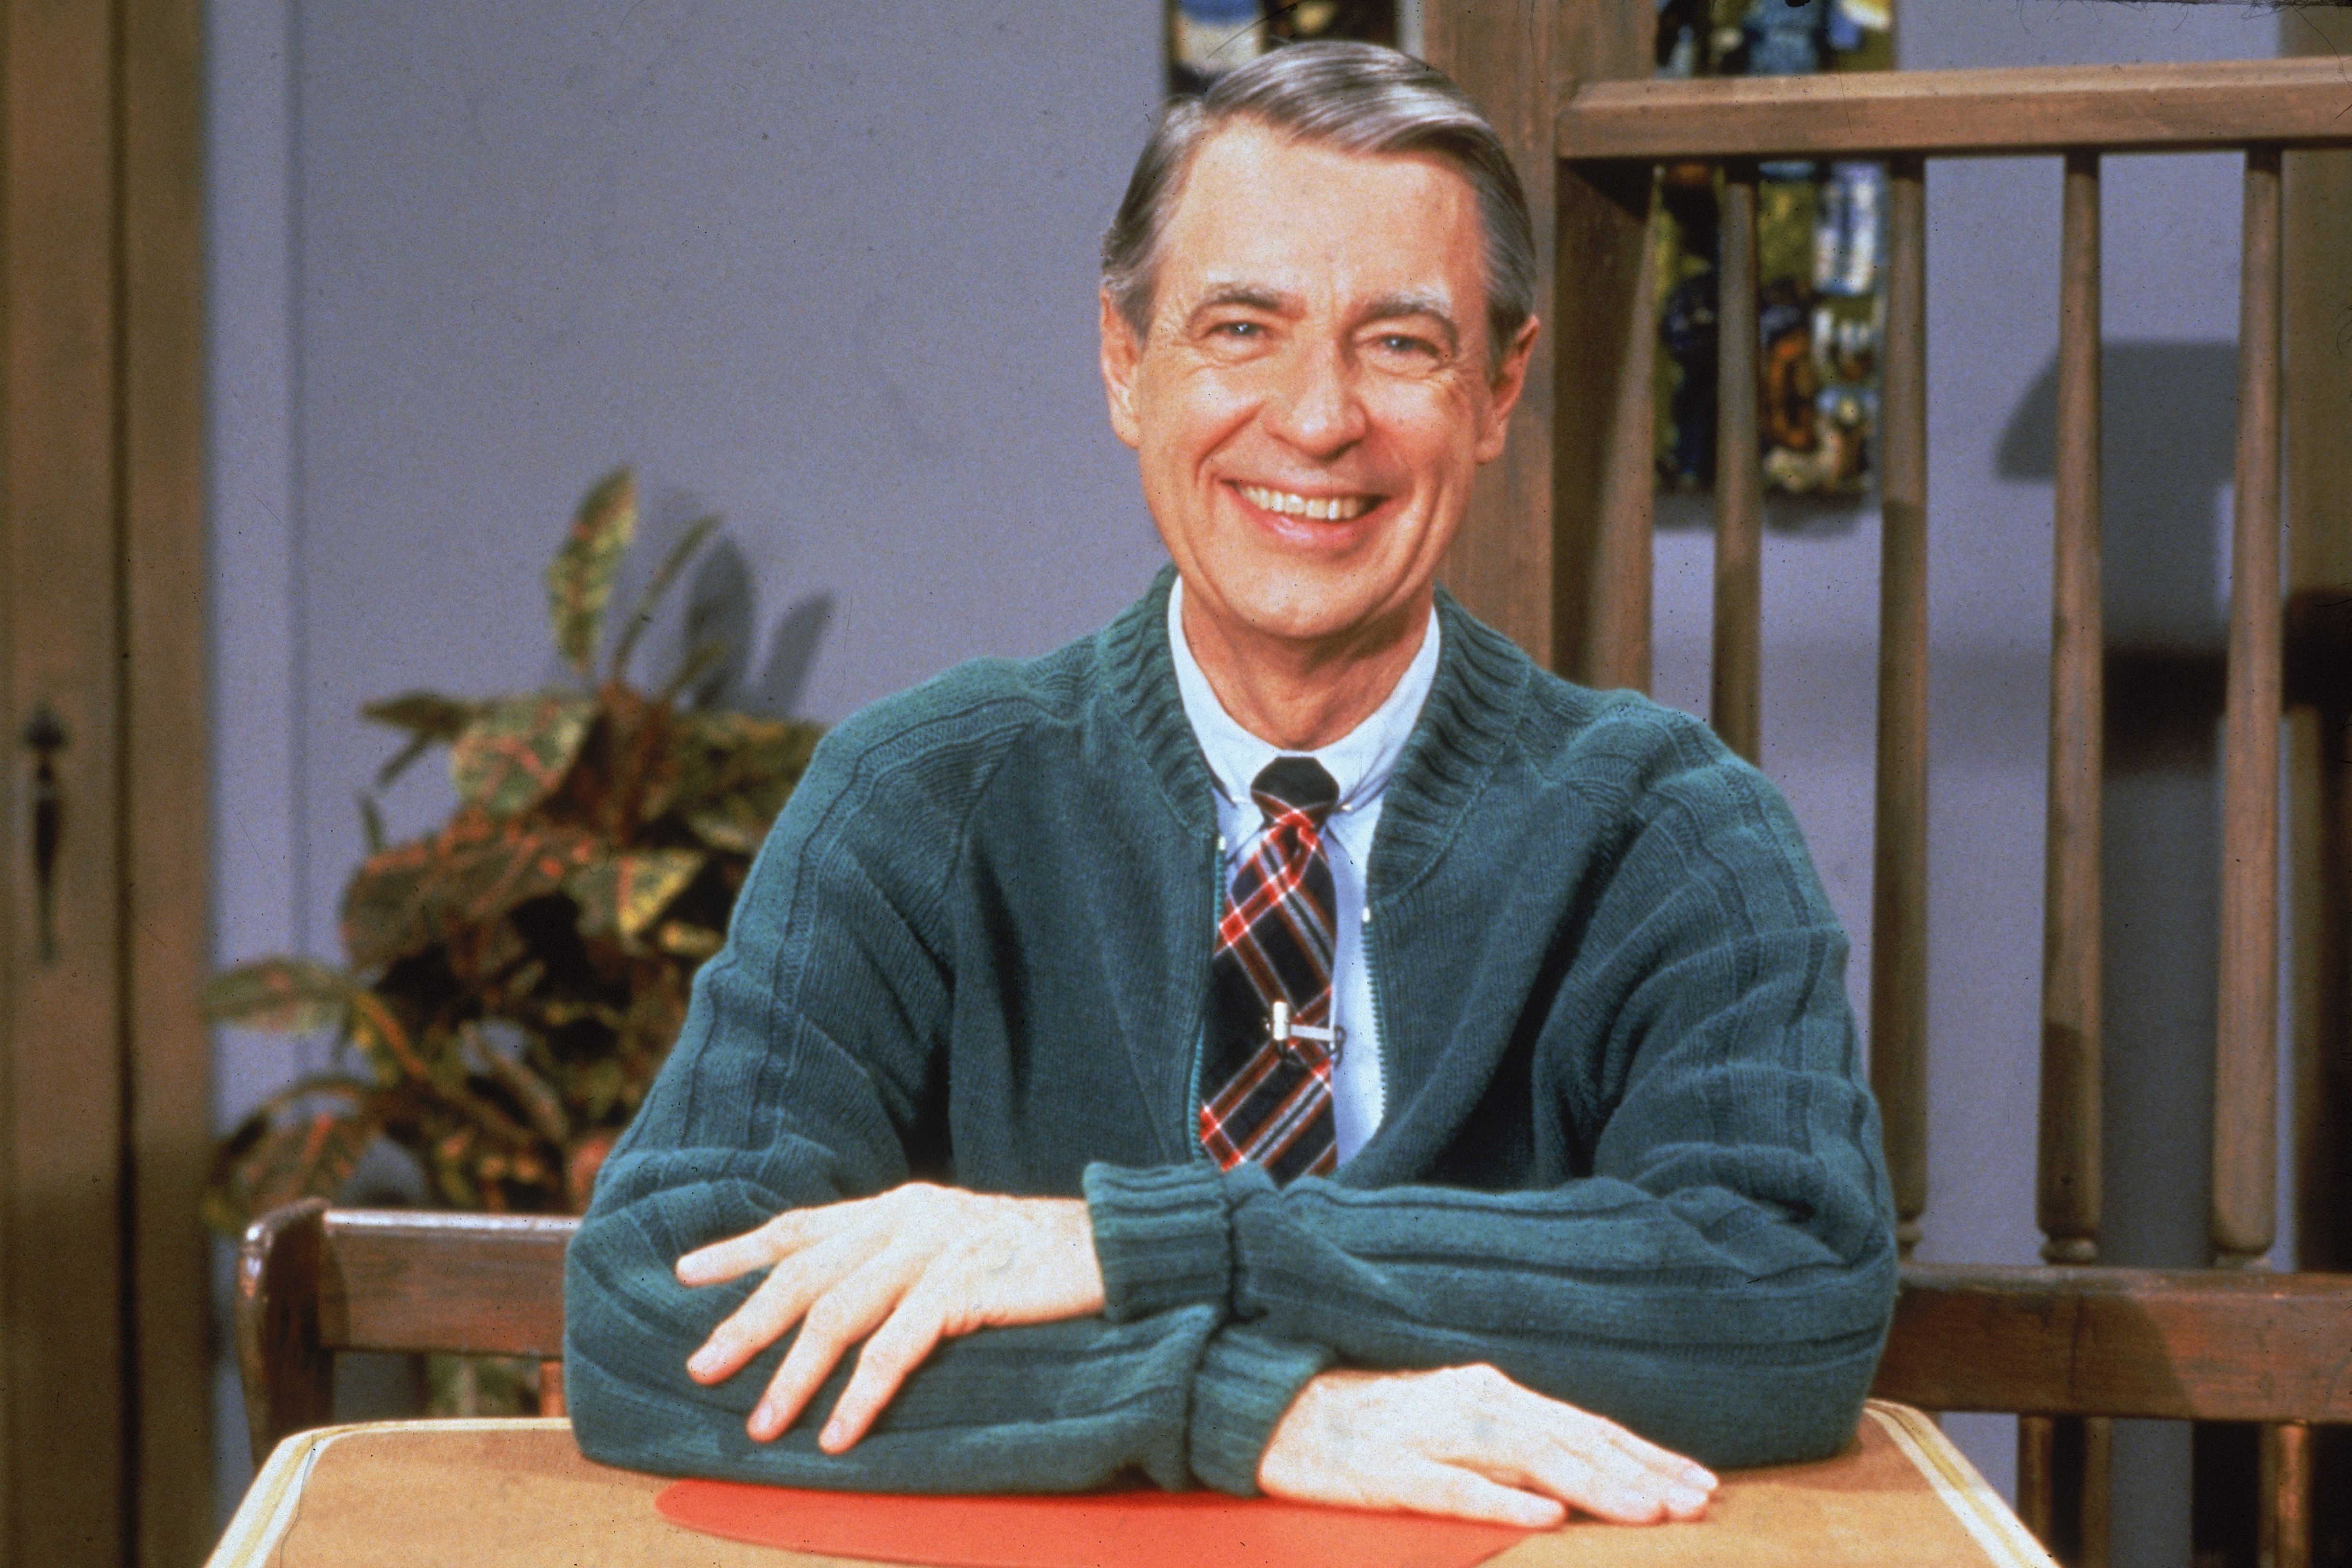 Allergi Ryg, ryg, ryg del vores Remember when Mister Rogers changed into his cardigan? | CNN